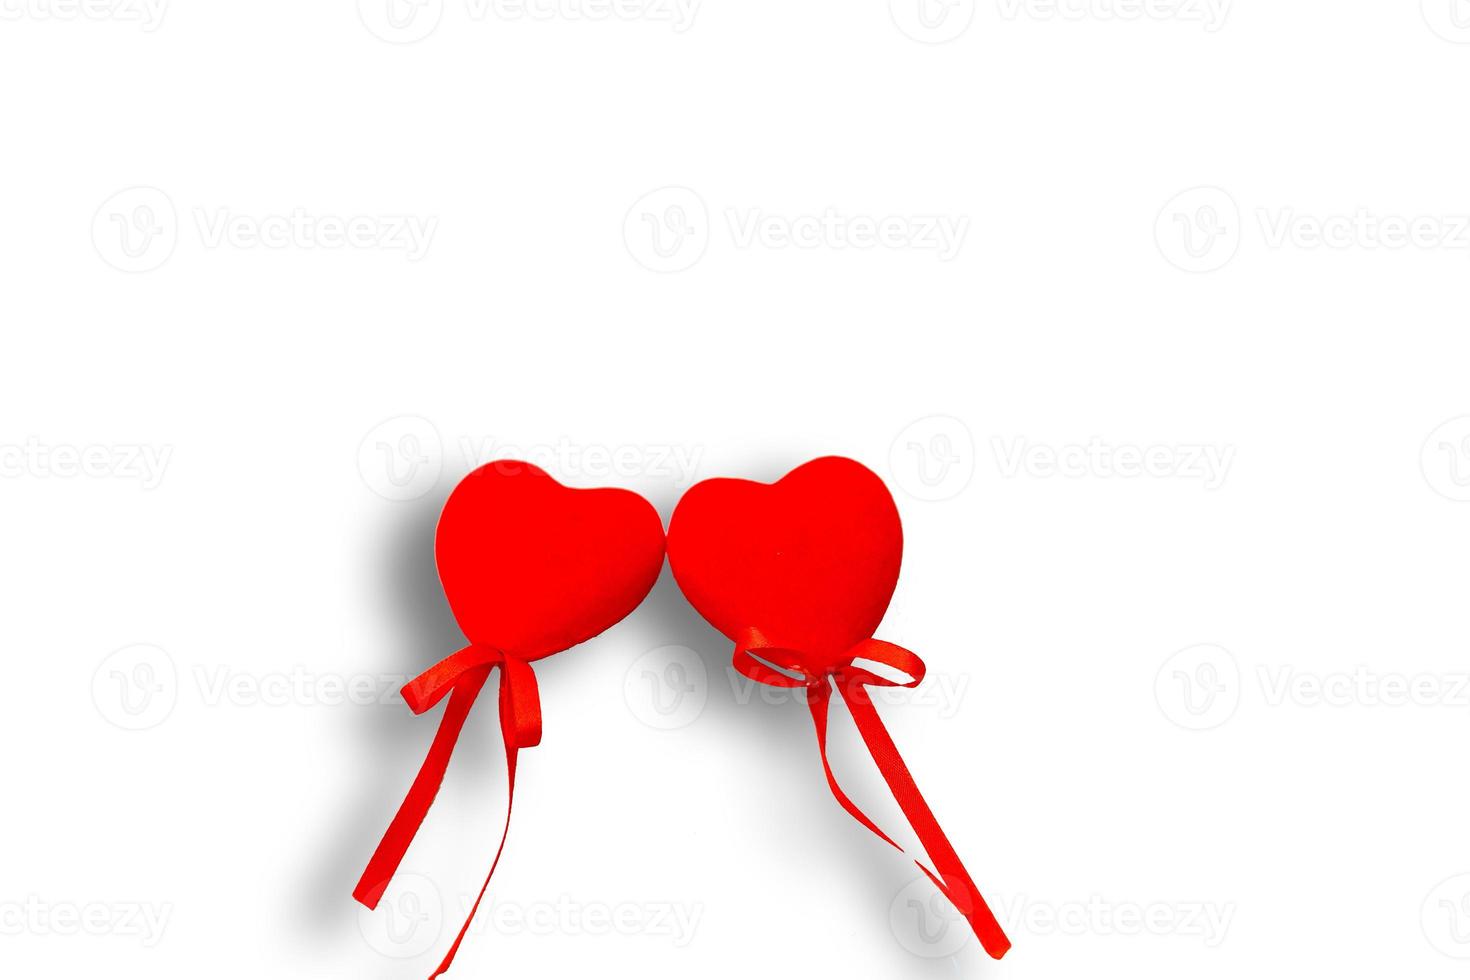 Love red hearts on white background for valentines day, card concept photo